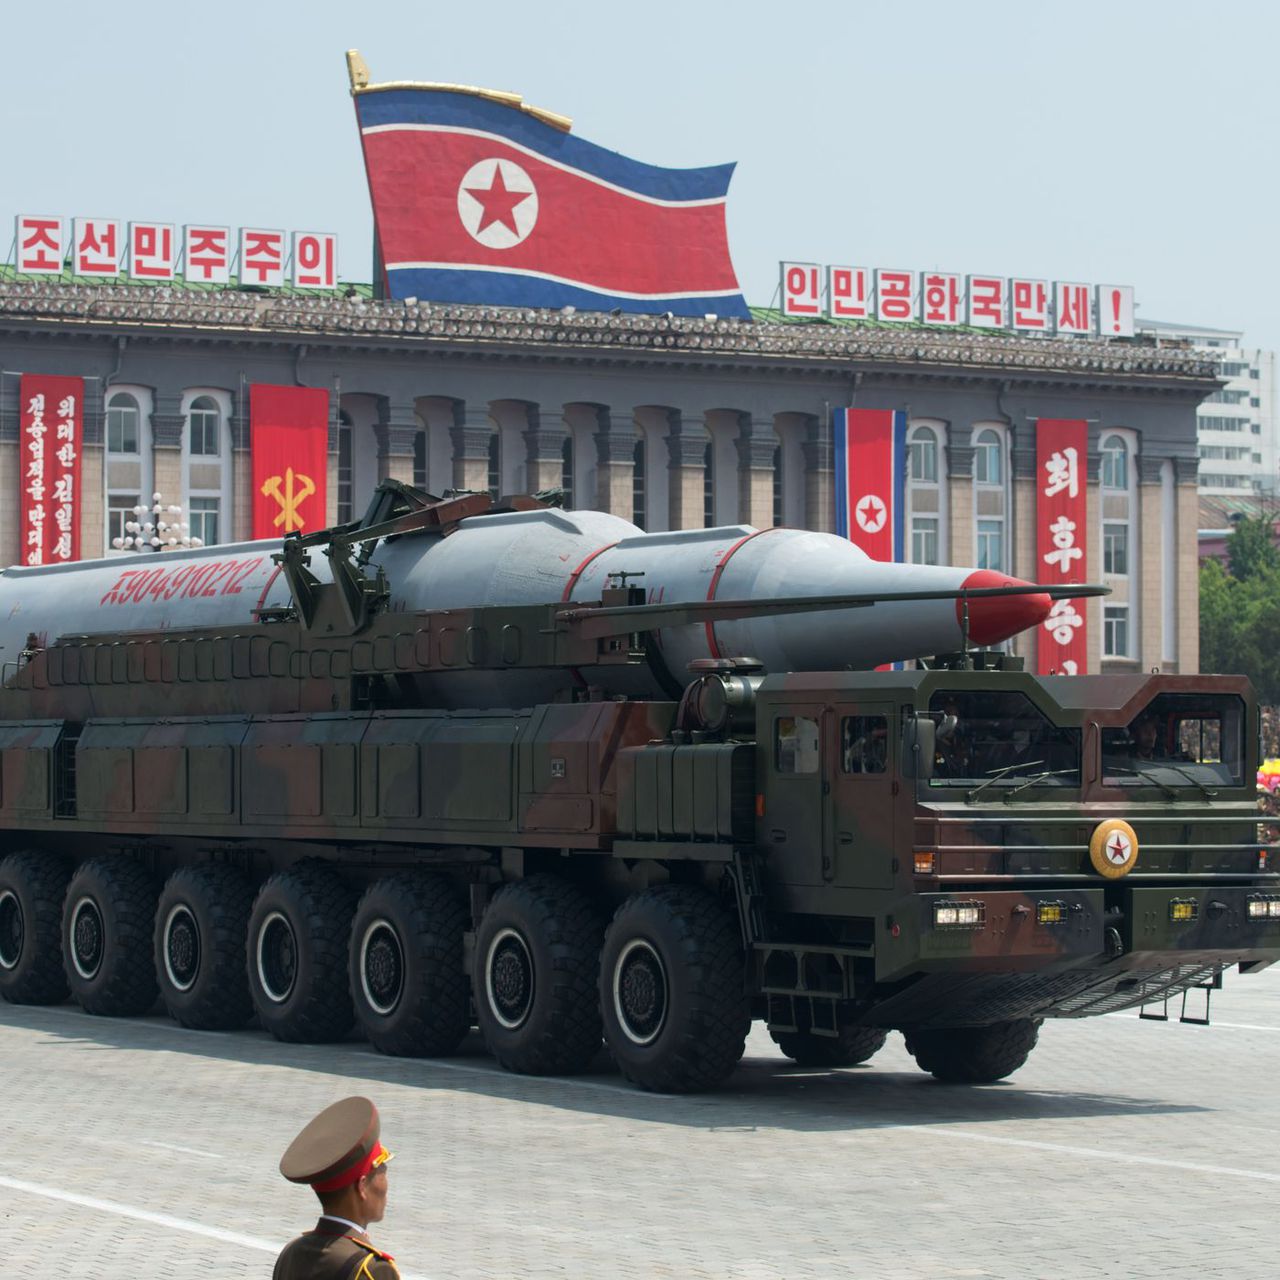 South Korea called the launch 'inapropriate', image via Getty Images